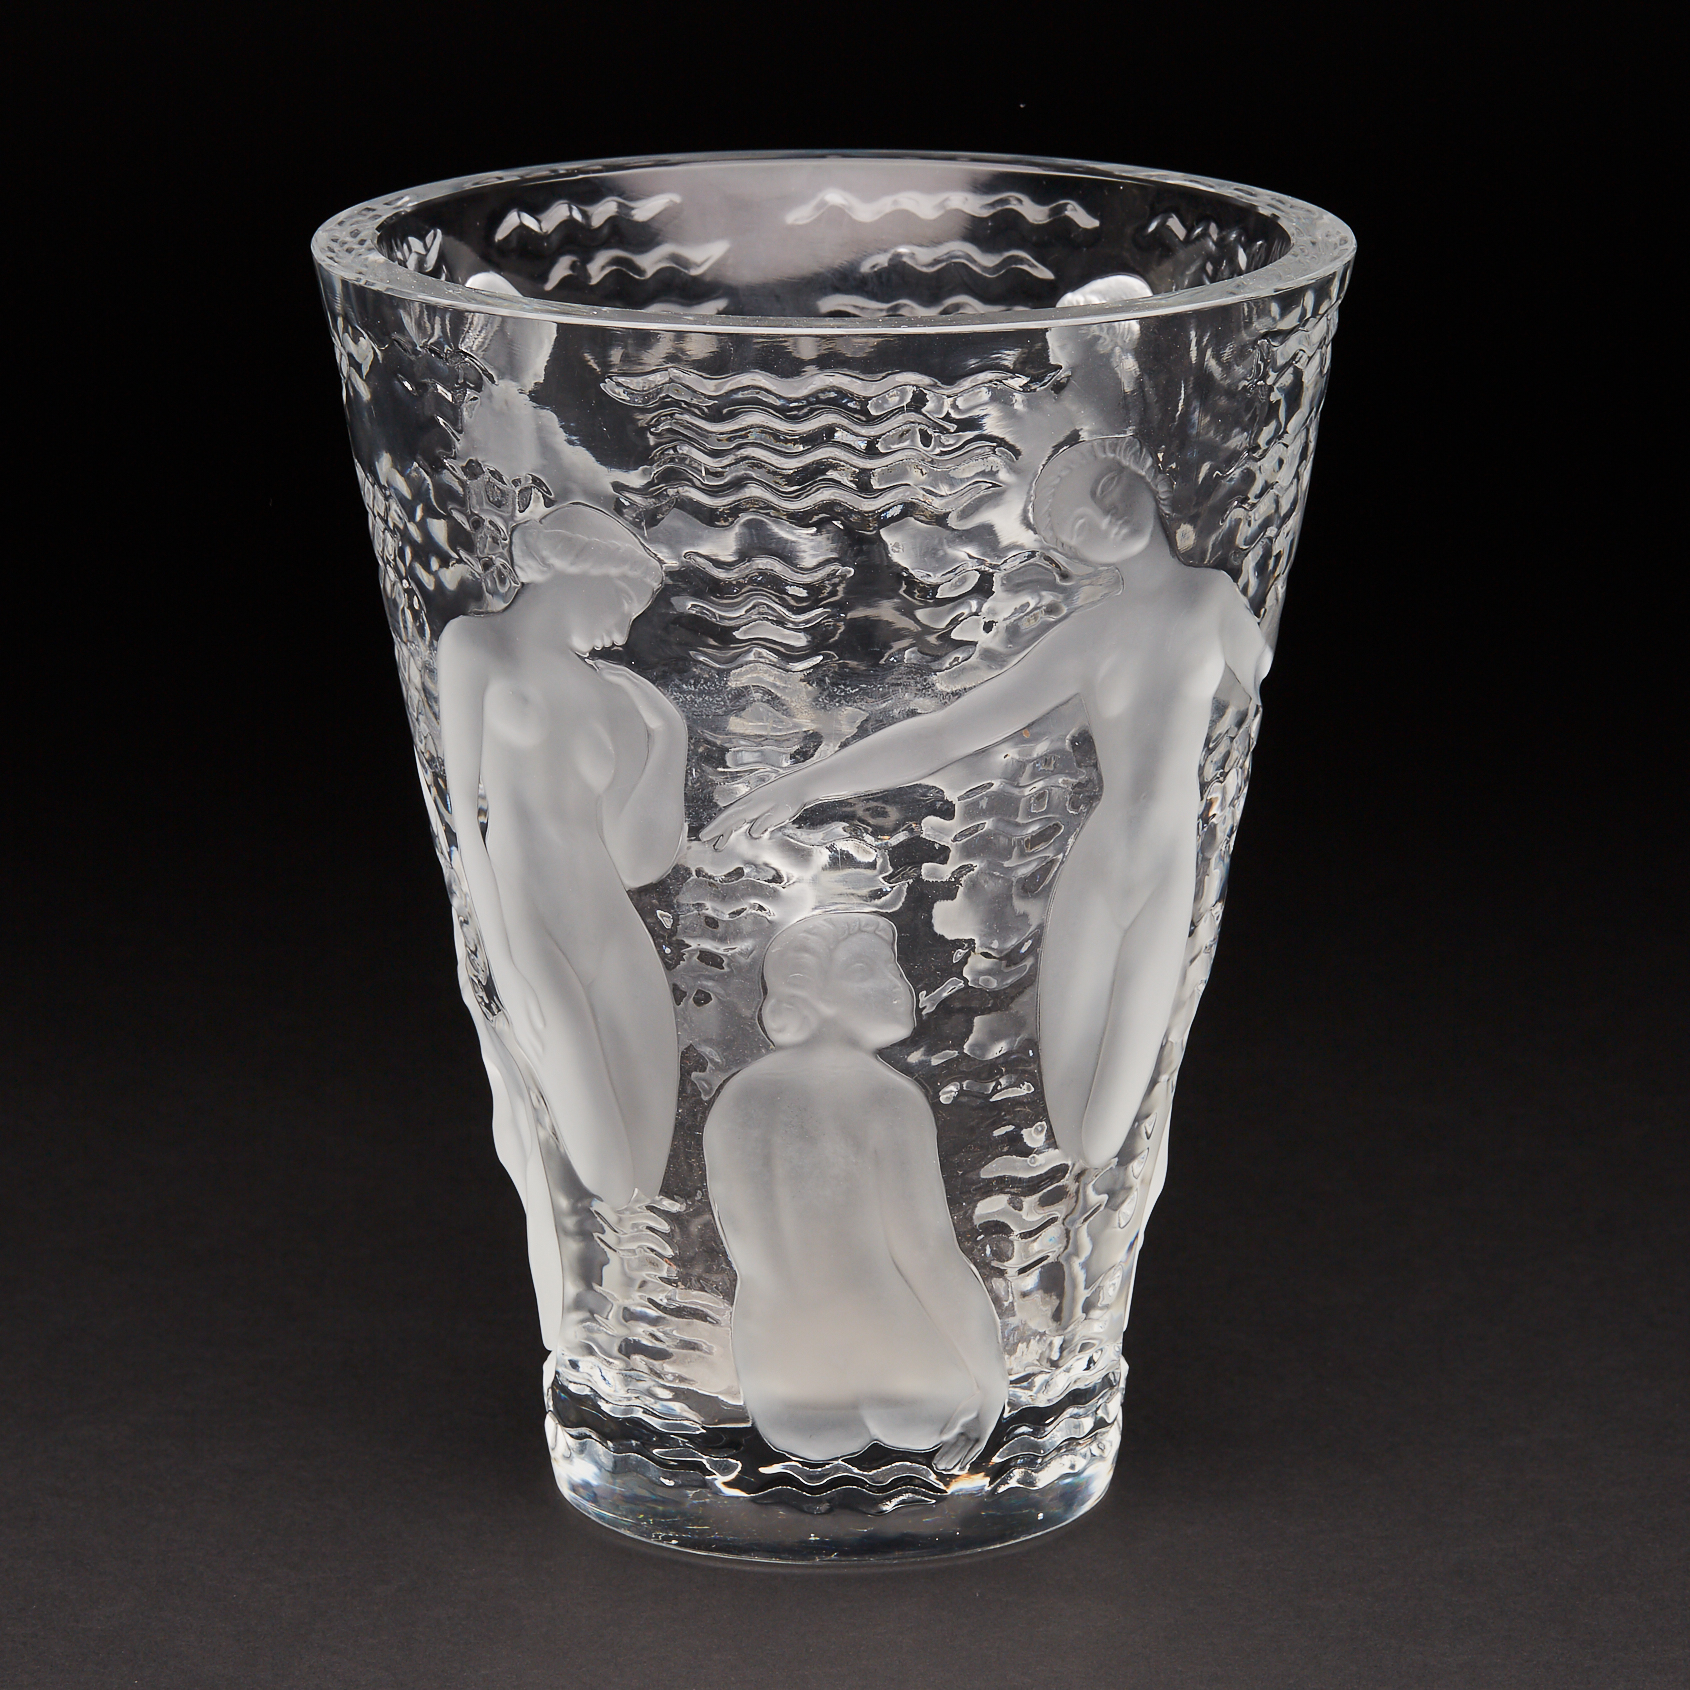 ‘Ondines’, Lalique Moulded and Partly Frosted Glass Vase, post-1945